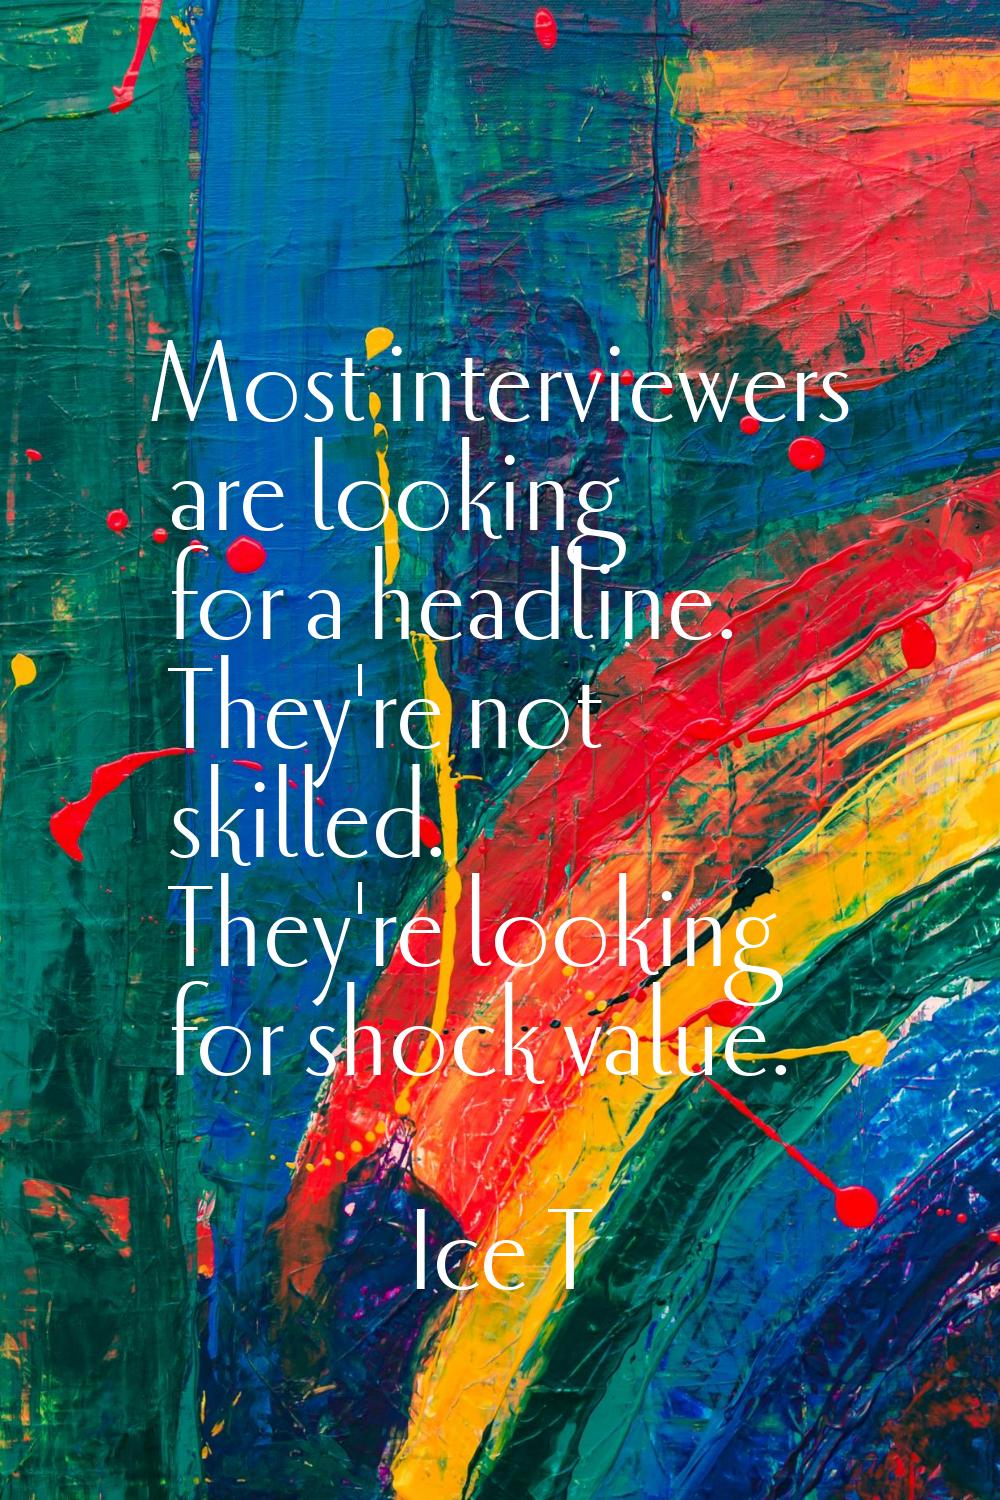 Most interviewers are looking for a headline. They're not skilled. They're looking for shock value.